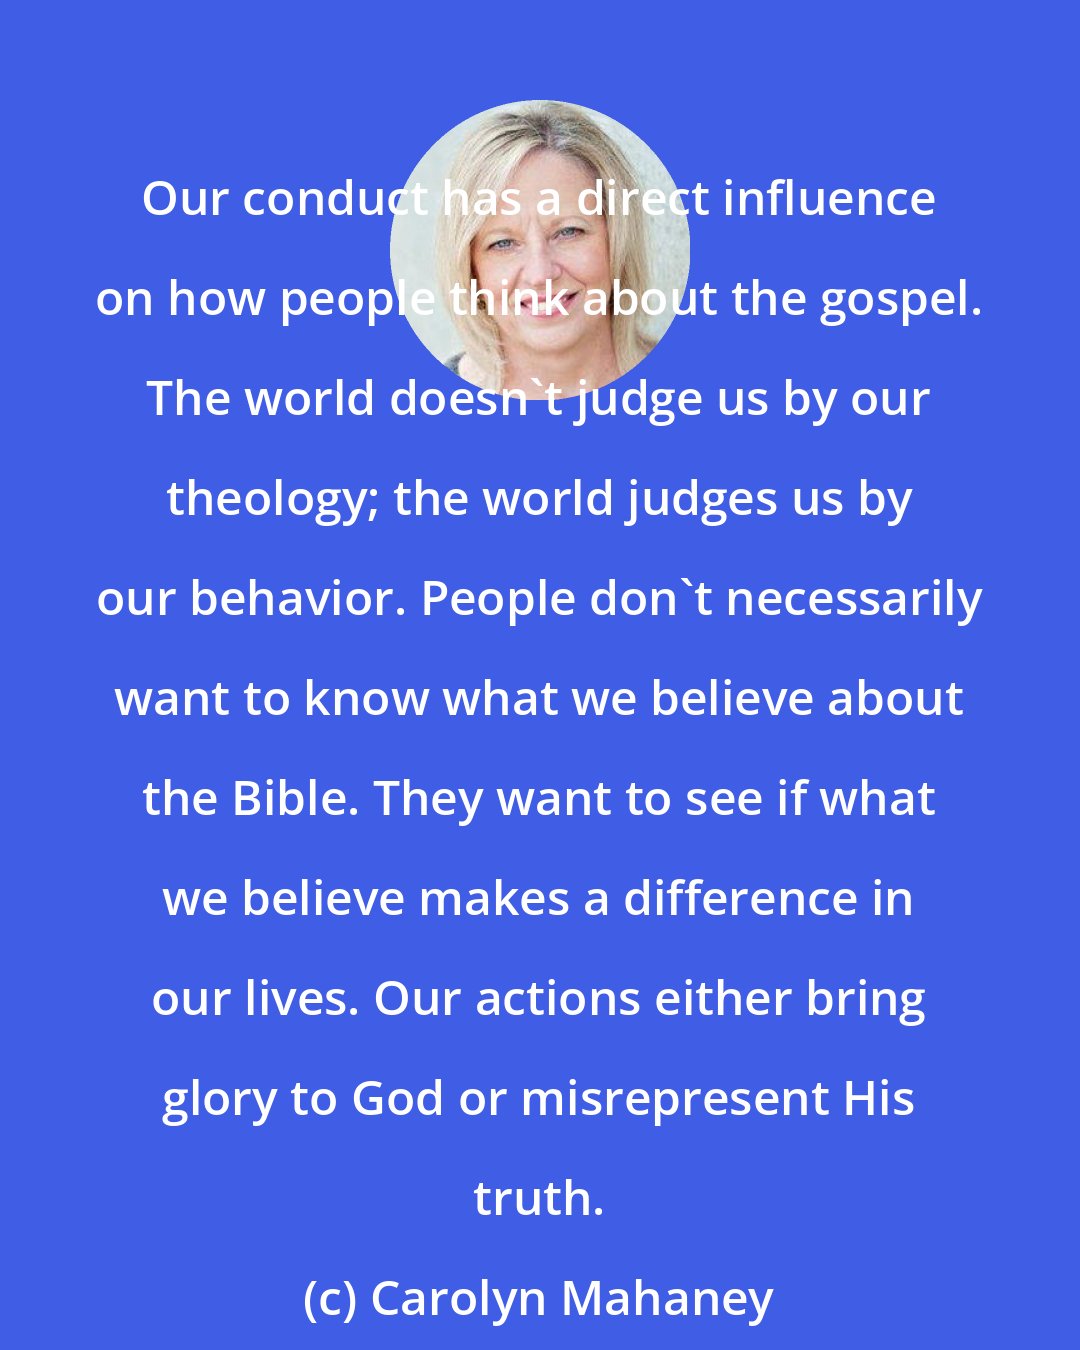 Carolyn Mahaney: Our conduct has a direct influence on how people think about the gospel. The world doesn't judge us by our theology; the world judges us by our behavior. People don't necessarily want to know what we believe about the Bible. They want to see if what we believe makes a difference in our lives. Our actions either bring glory to God or misrepresent His truth.